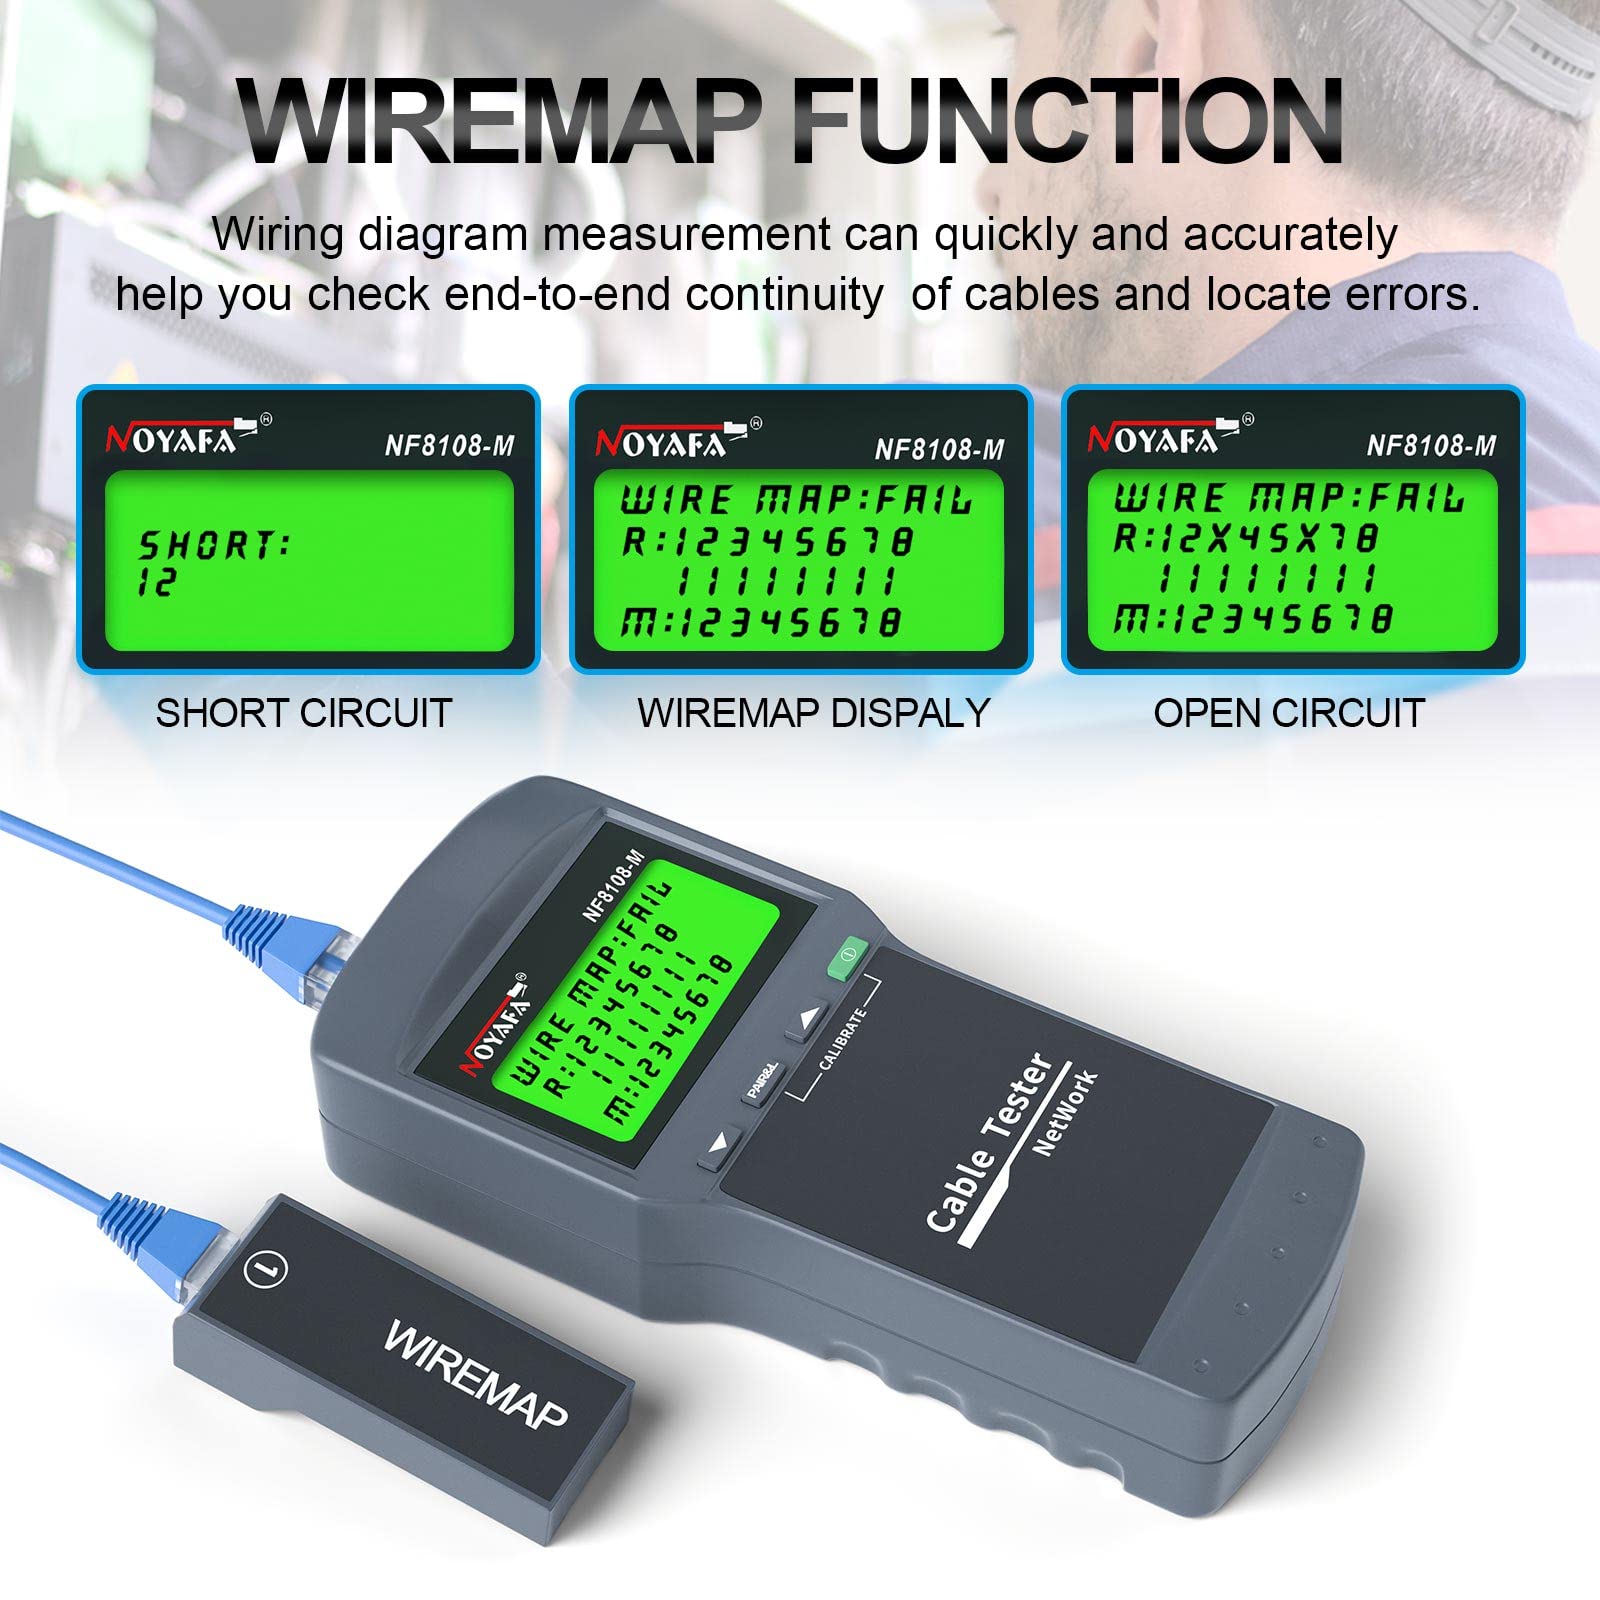 Network Cable Tester - NOYAFA Cable Wire Fault Finder for RJ45 Cat5, Cat6, 5e, 6e Measure Length, Locate The Breakage Point, Check Wiring Error with 8 Far-end Passive Test Jacks